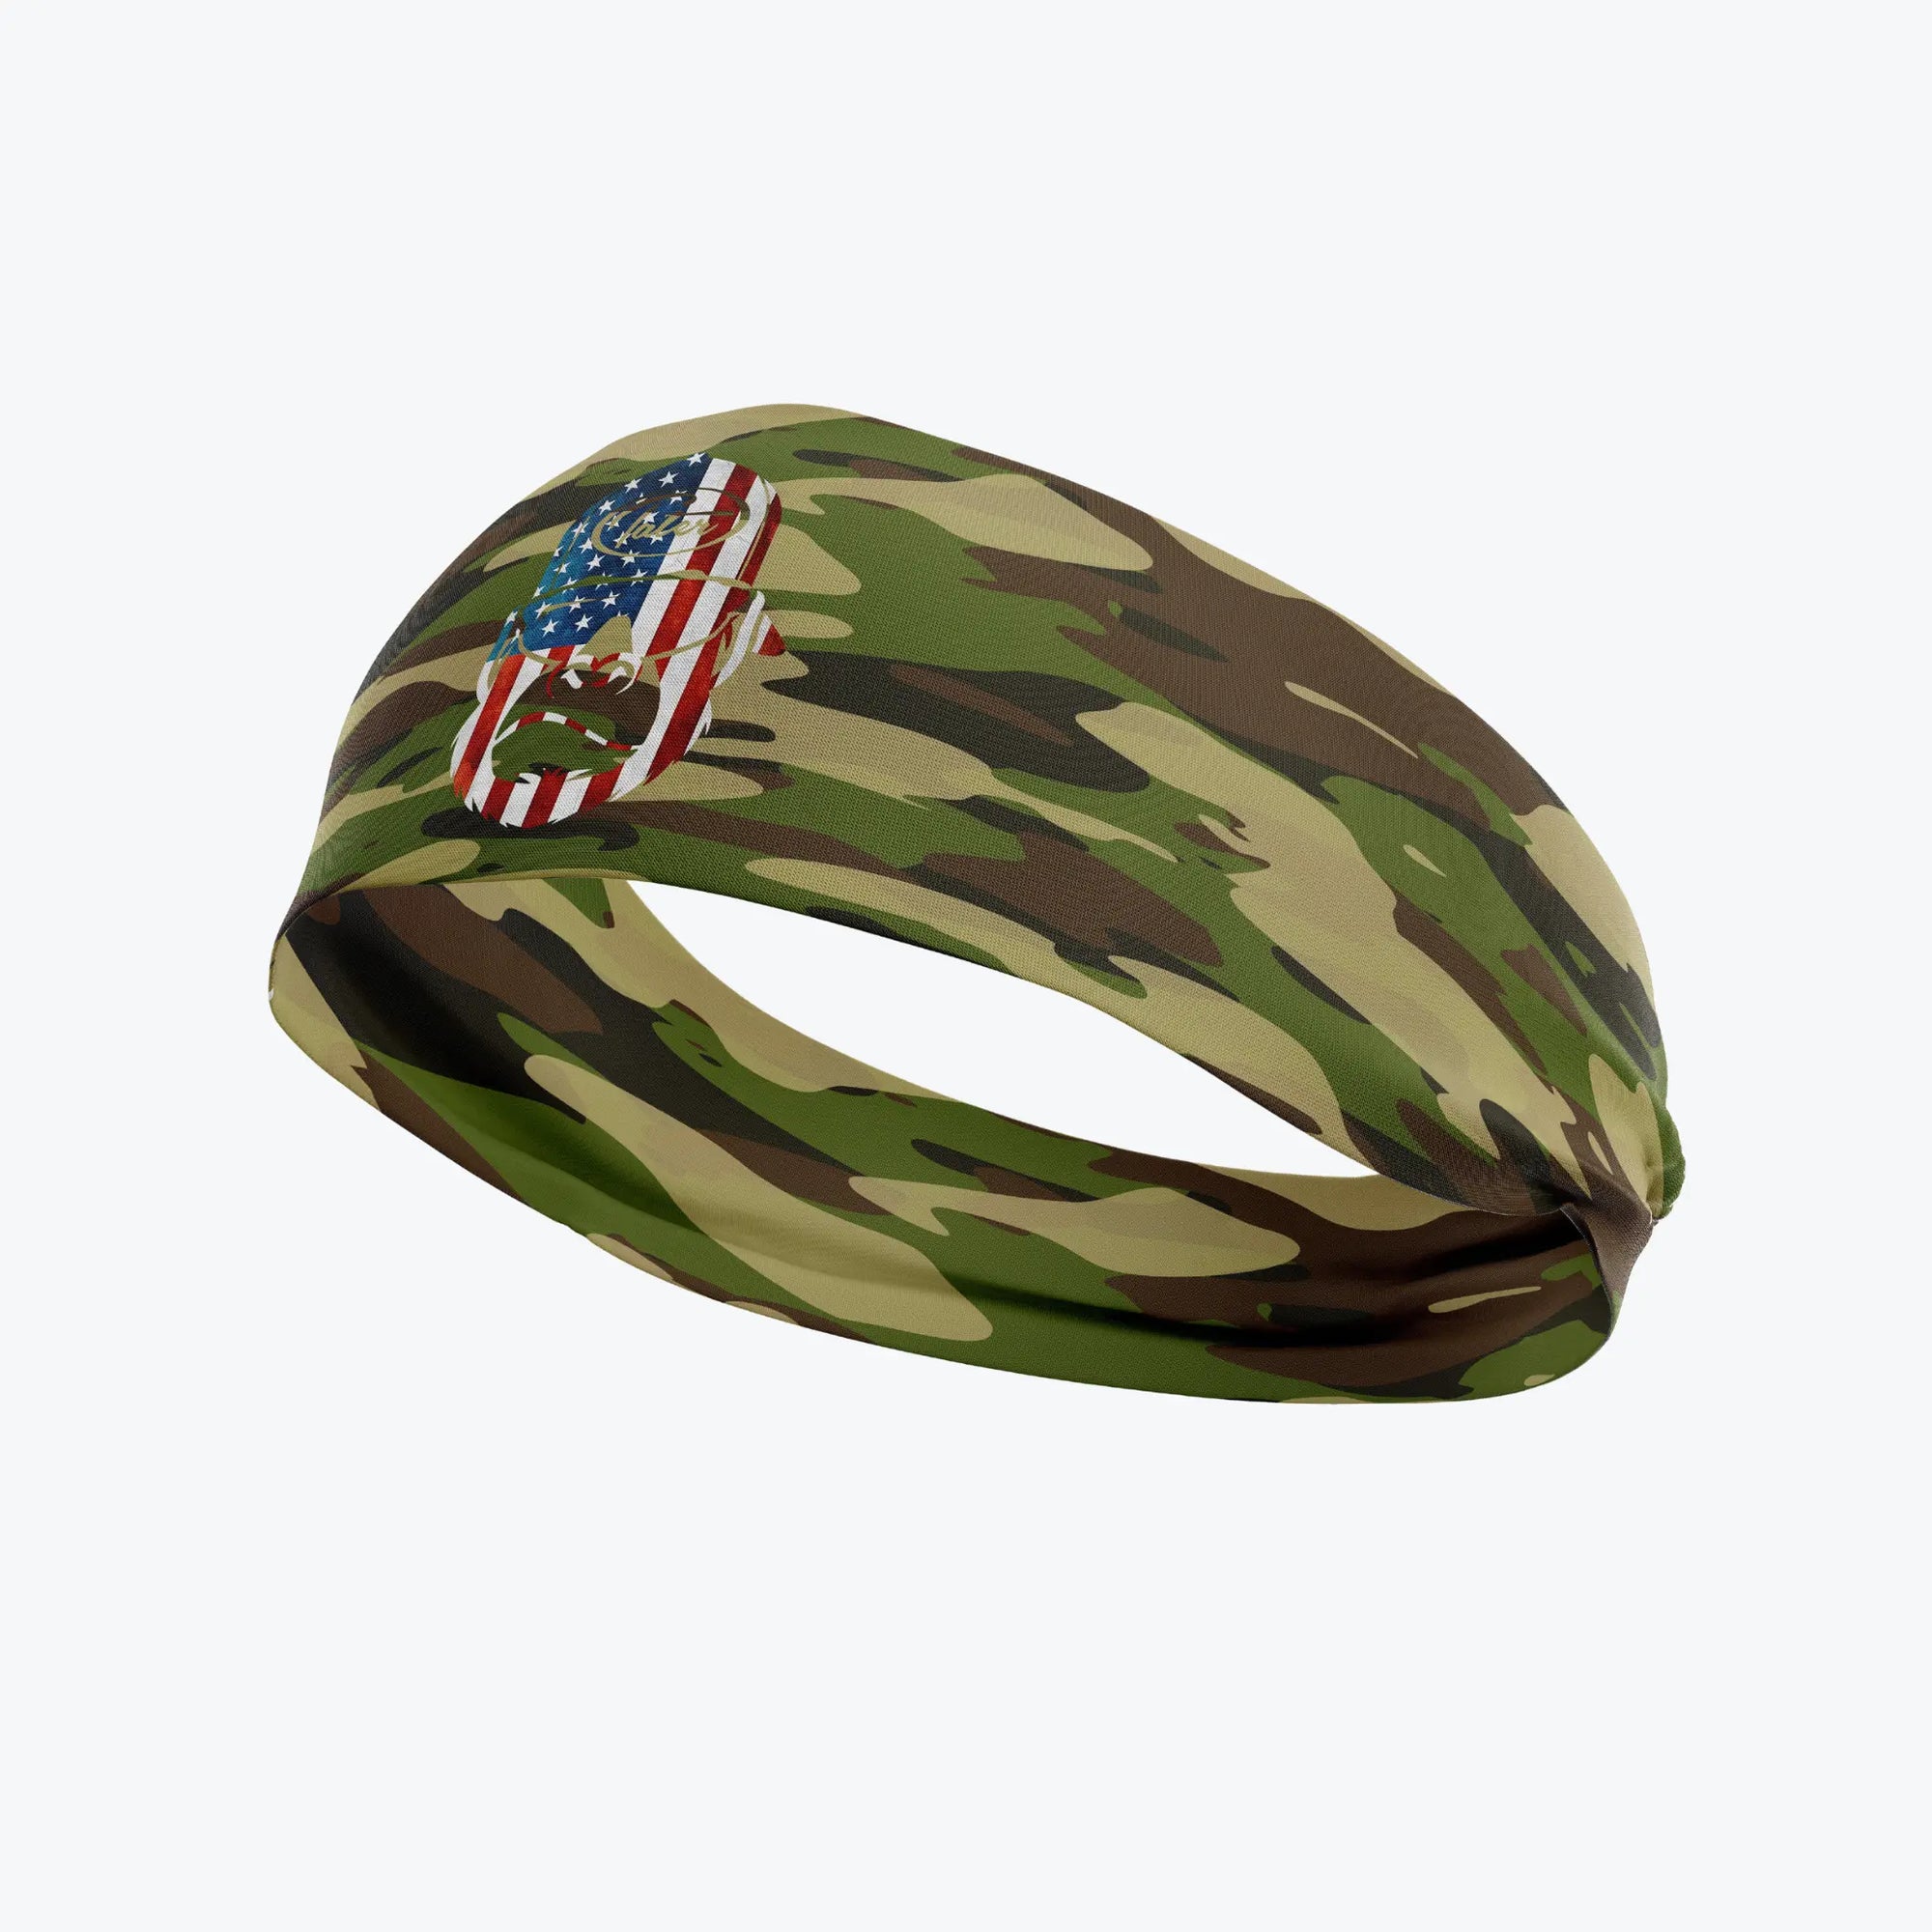 Camo-patterned moisture-wicking headband designed for baseball workouts, featuring a patriotic USA flag patch, combining functionality with a tribute to American spirit by Tater Baseball.